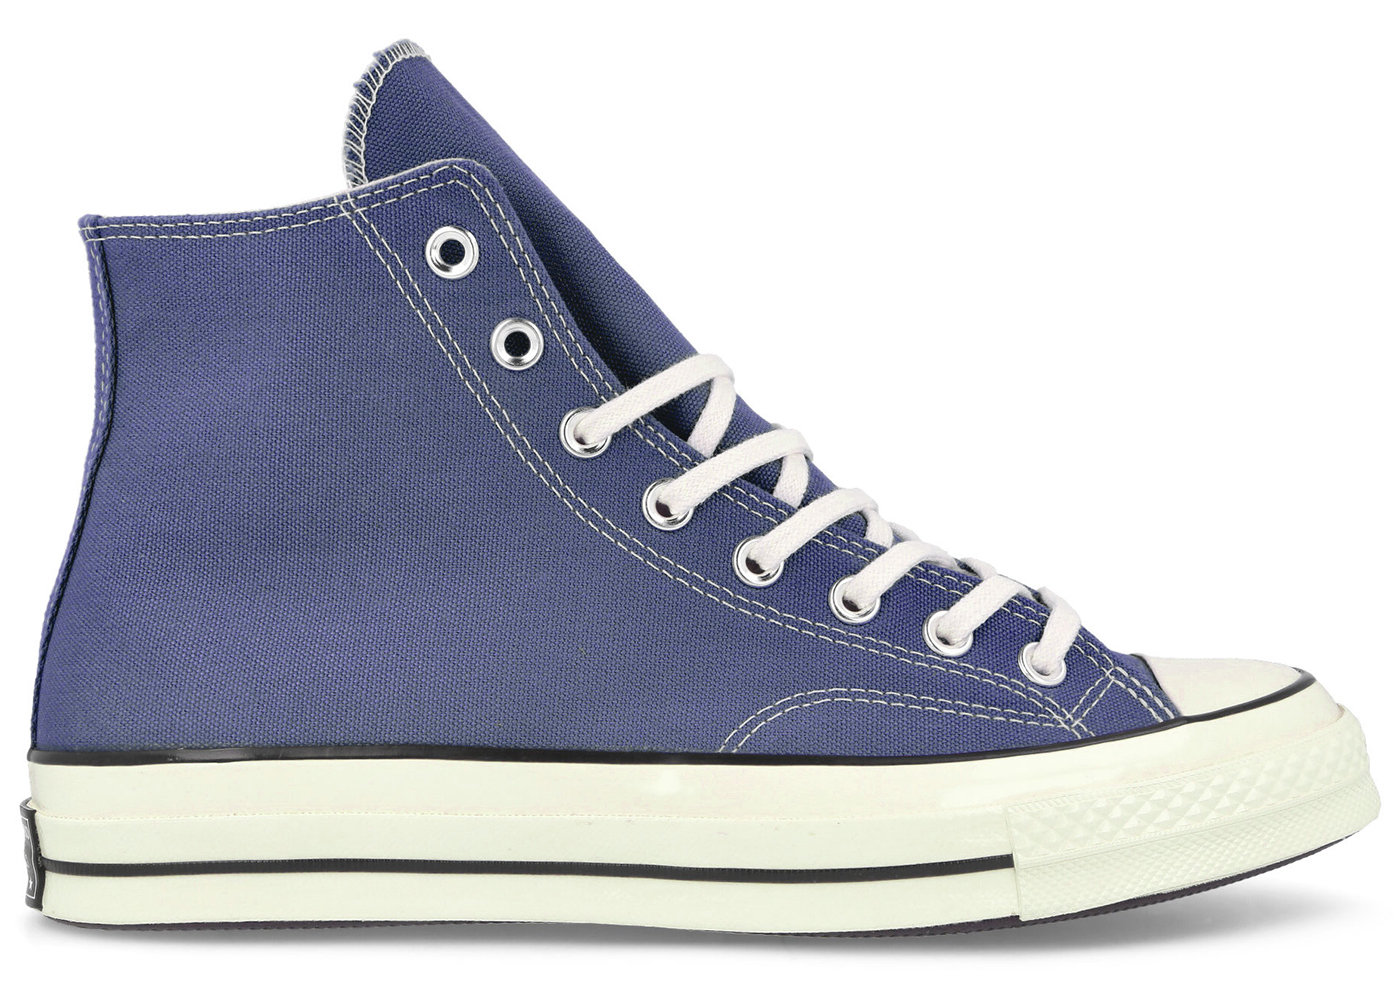 Converse Chuck Taylor All Star 70 Hi Uncharted Waters Men's 